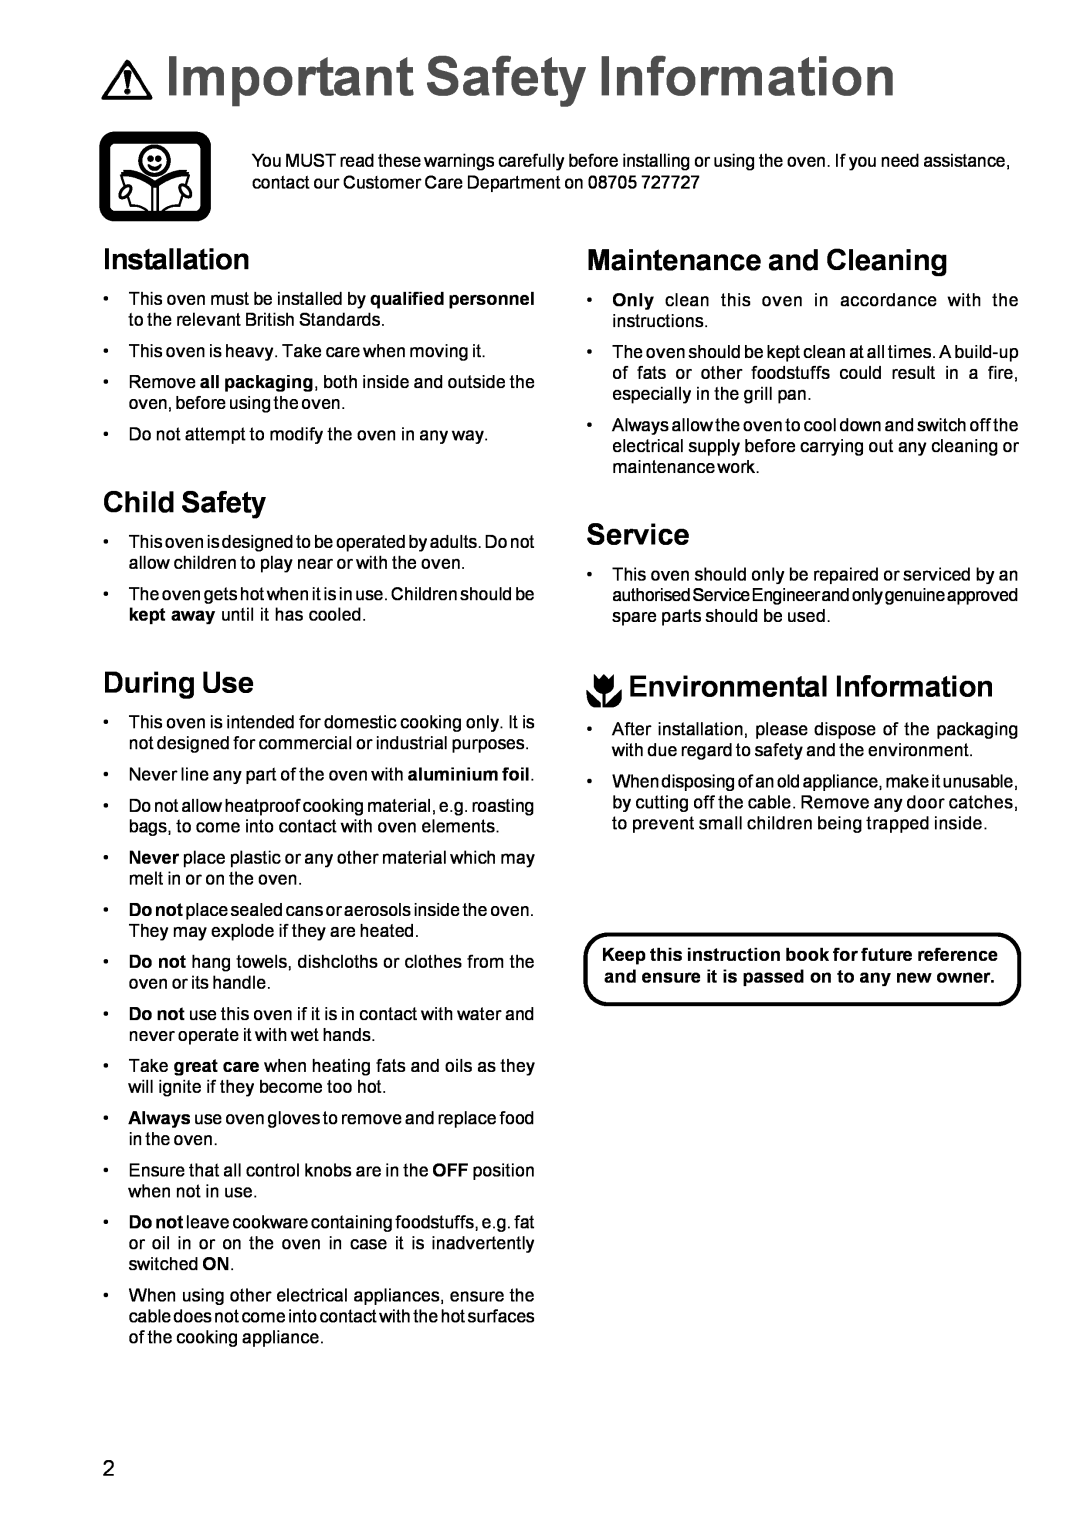 Zanussi ZBQ 365 Important Safety Information, Installation, Child Safety, Maintenance and Cleaning, Service, During Use 